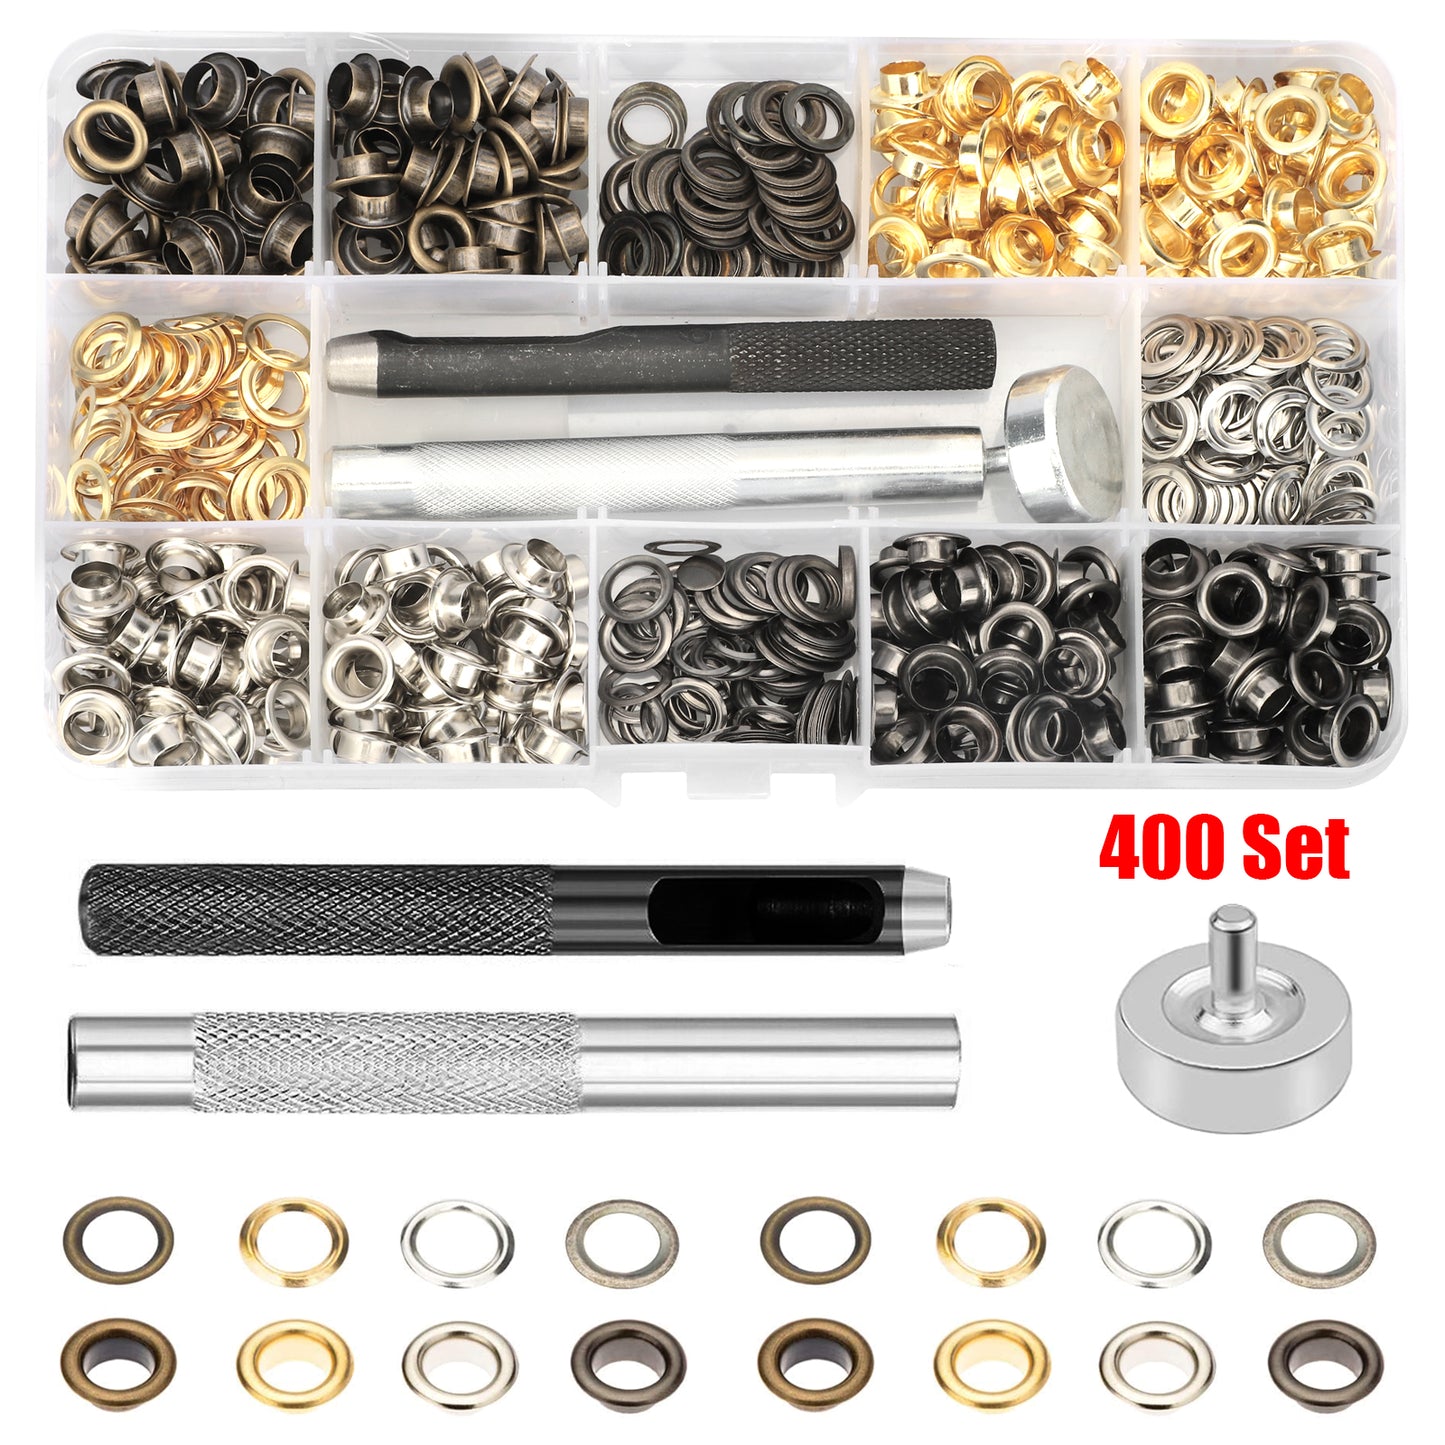 400 Piece 6mm Metal Grommet Kit. Eyelet kit with 4 colors